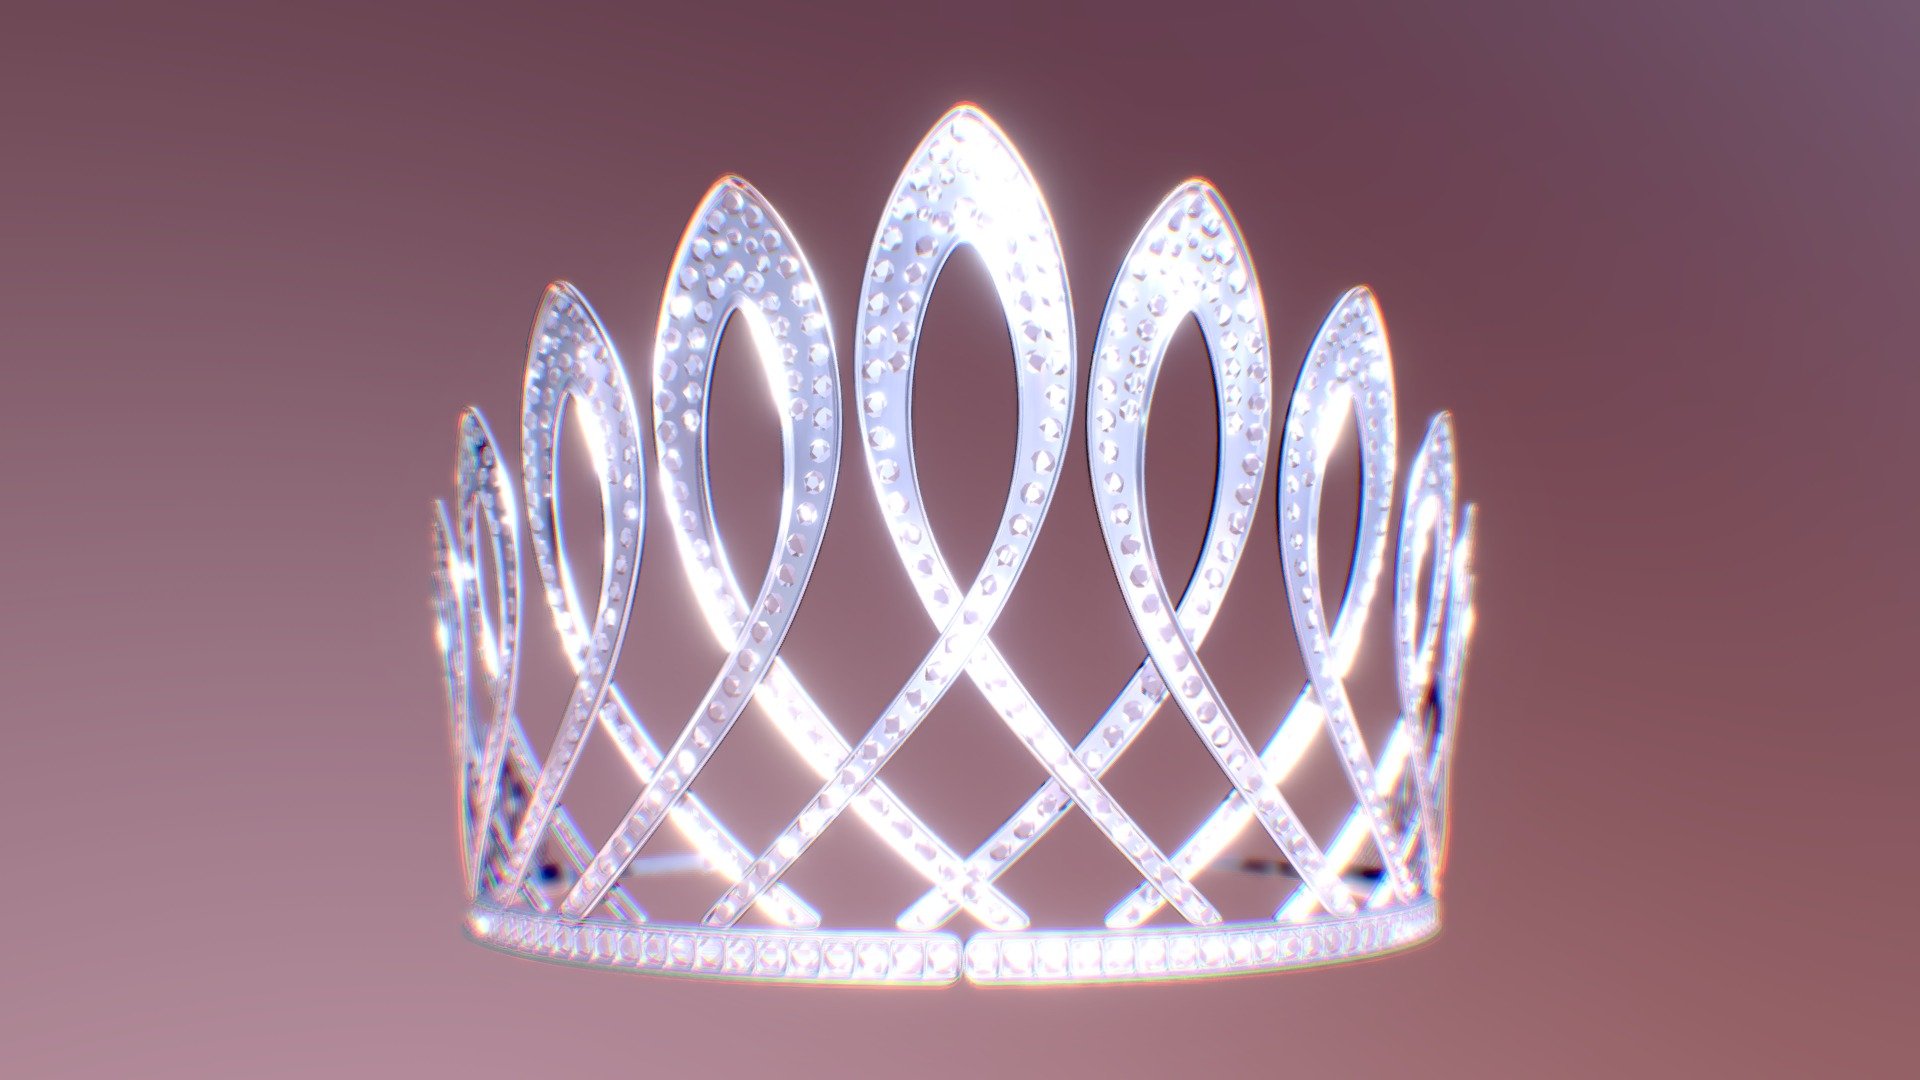 Tiara 3D object model in .obj format. Generic materials are included in .mtl file. For best results tweak your own render engine and materials. You also might be interested in other my tiara and crown models: https://sketchfab.com/sk-pro/collections/tiaras , https://sketchfab.com/sk-pro/collections/crowns .
Best Regards 3d model